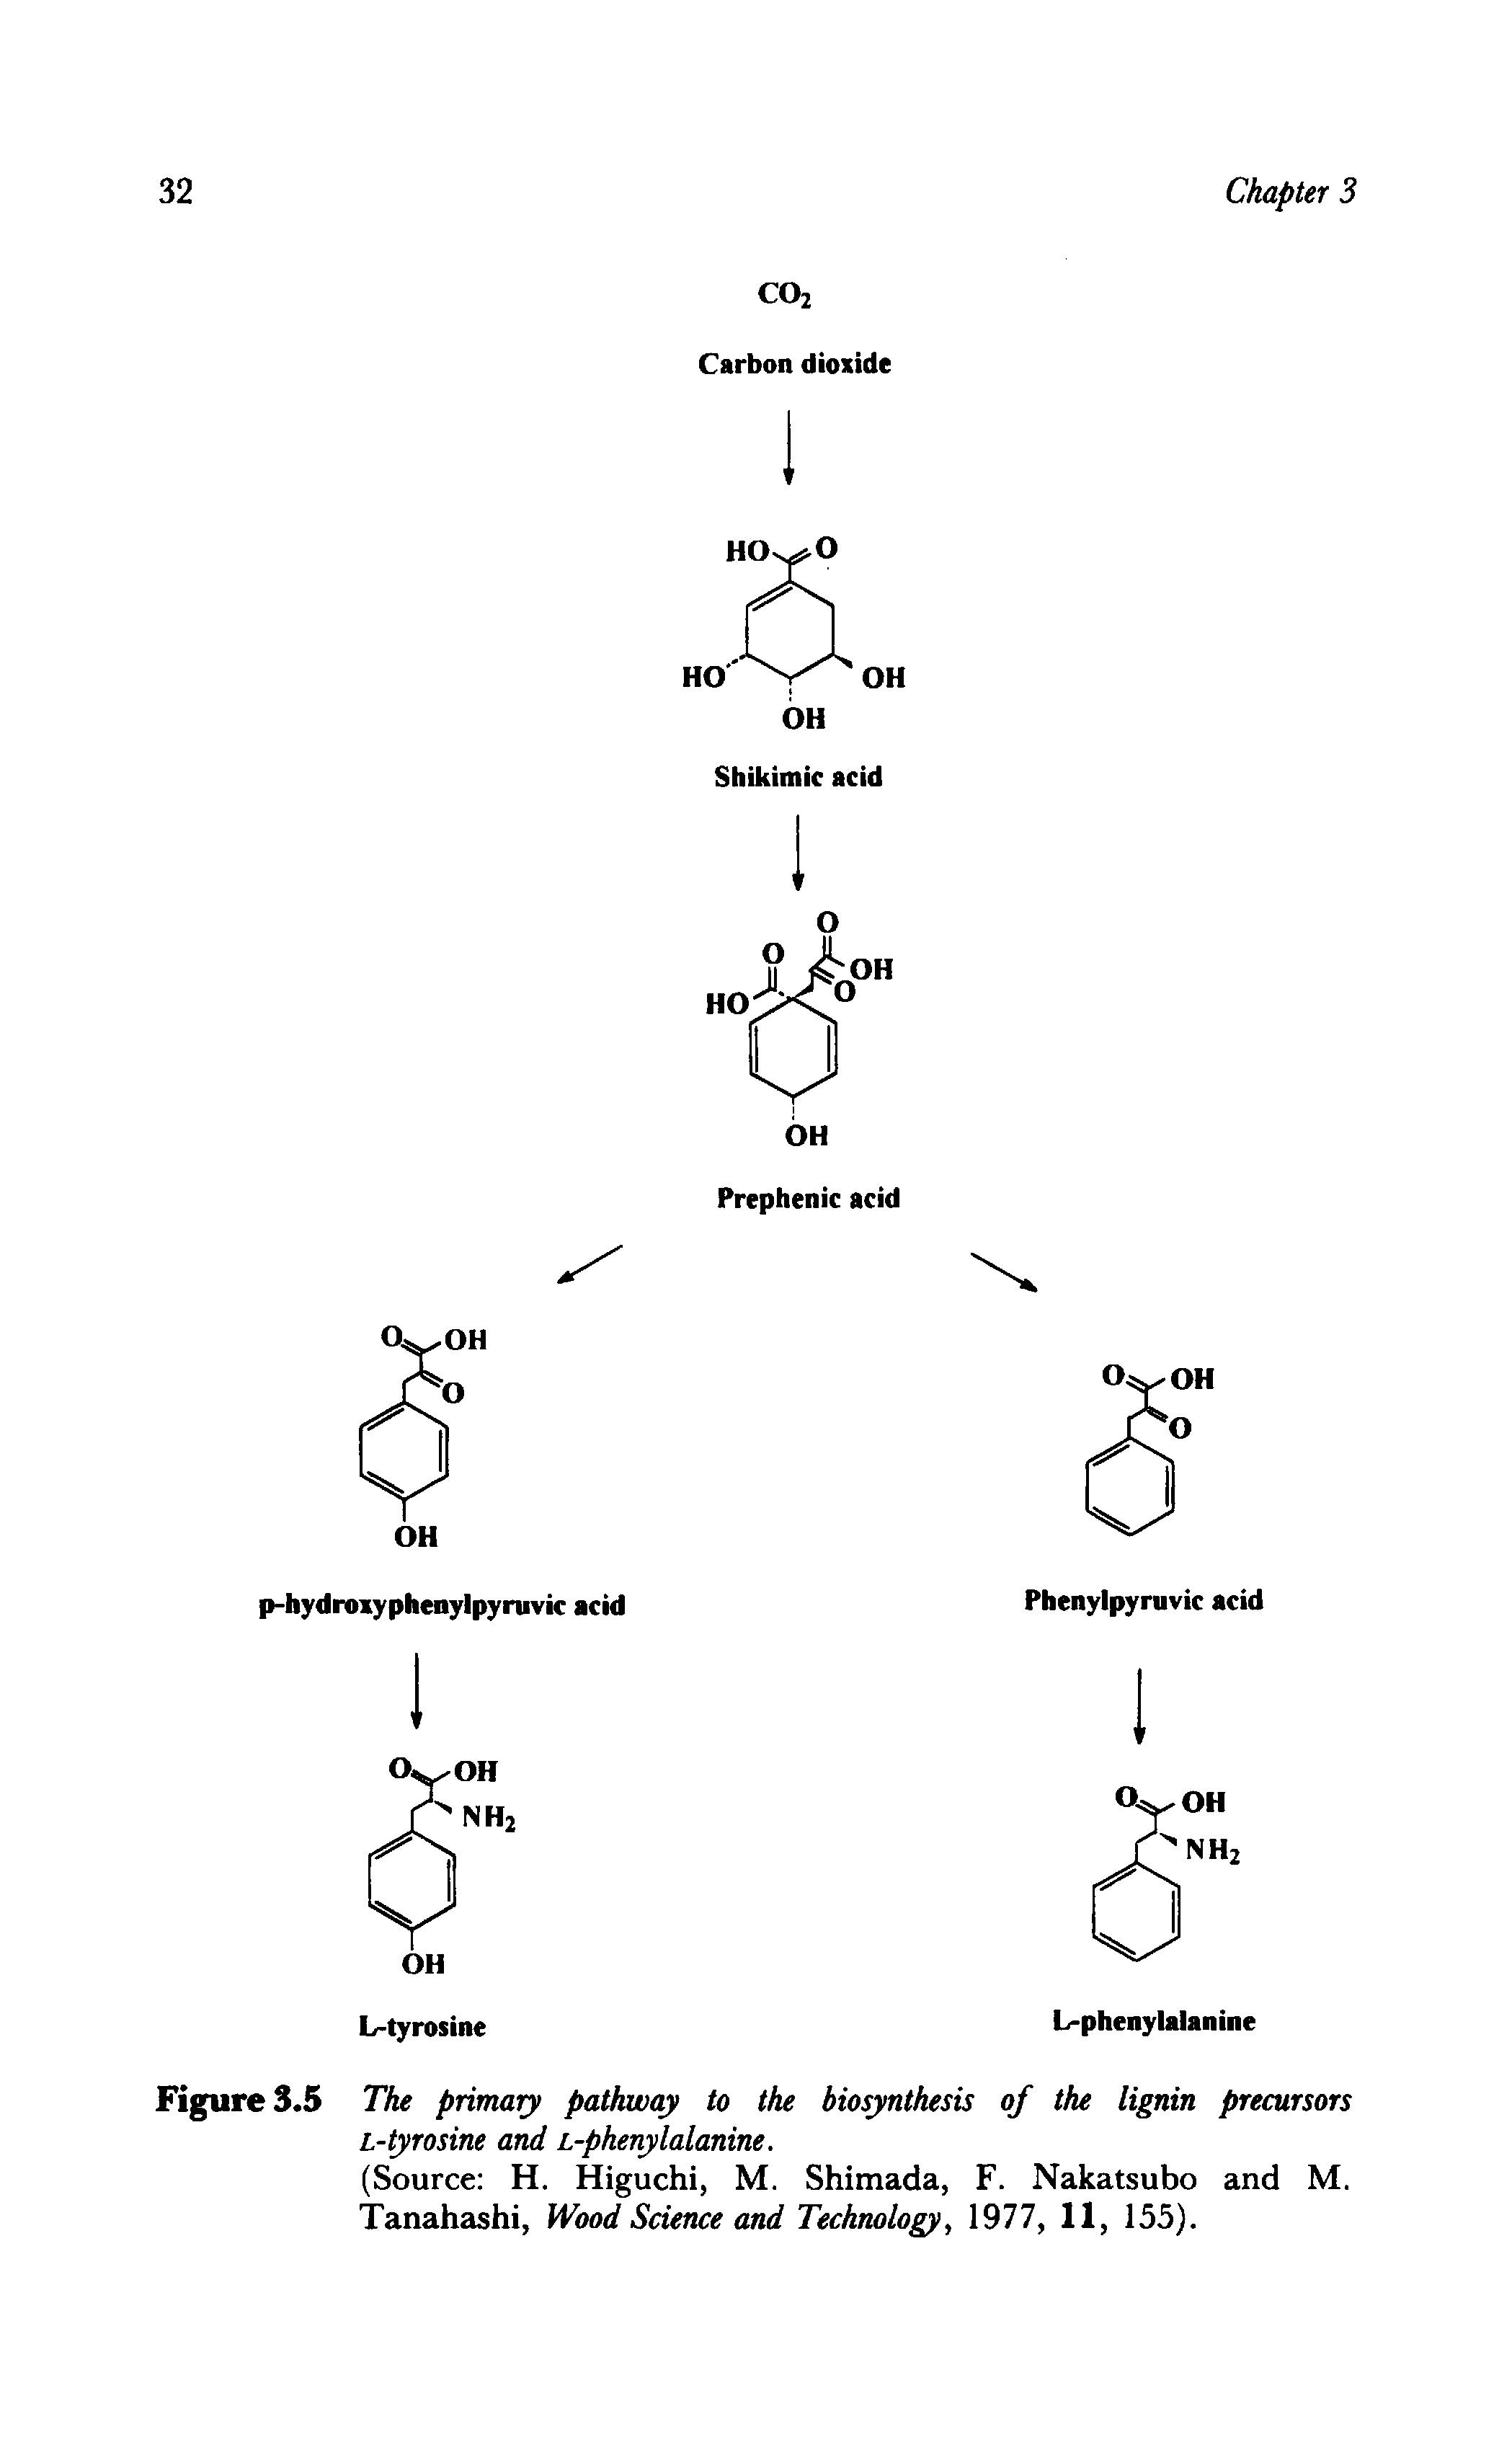 Figure 3.5 The primary pathway to the biosynthesis of the lignin precursors L-tyrosine and L-phenylalanine.